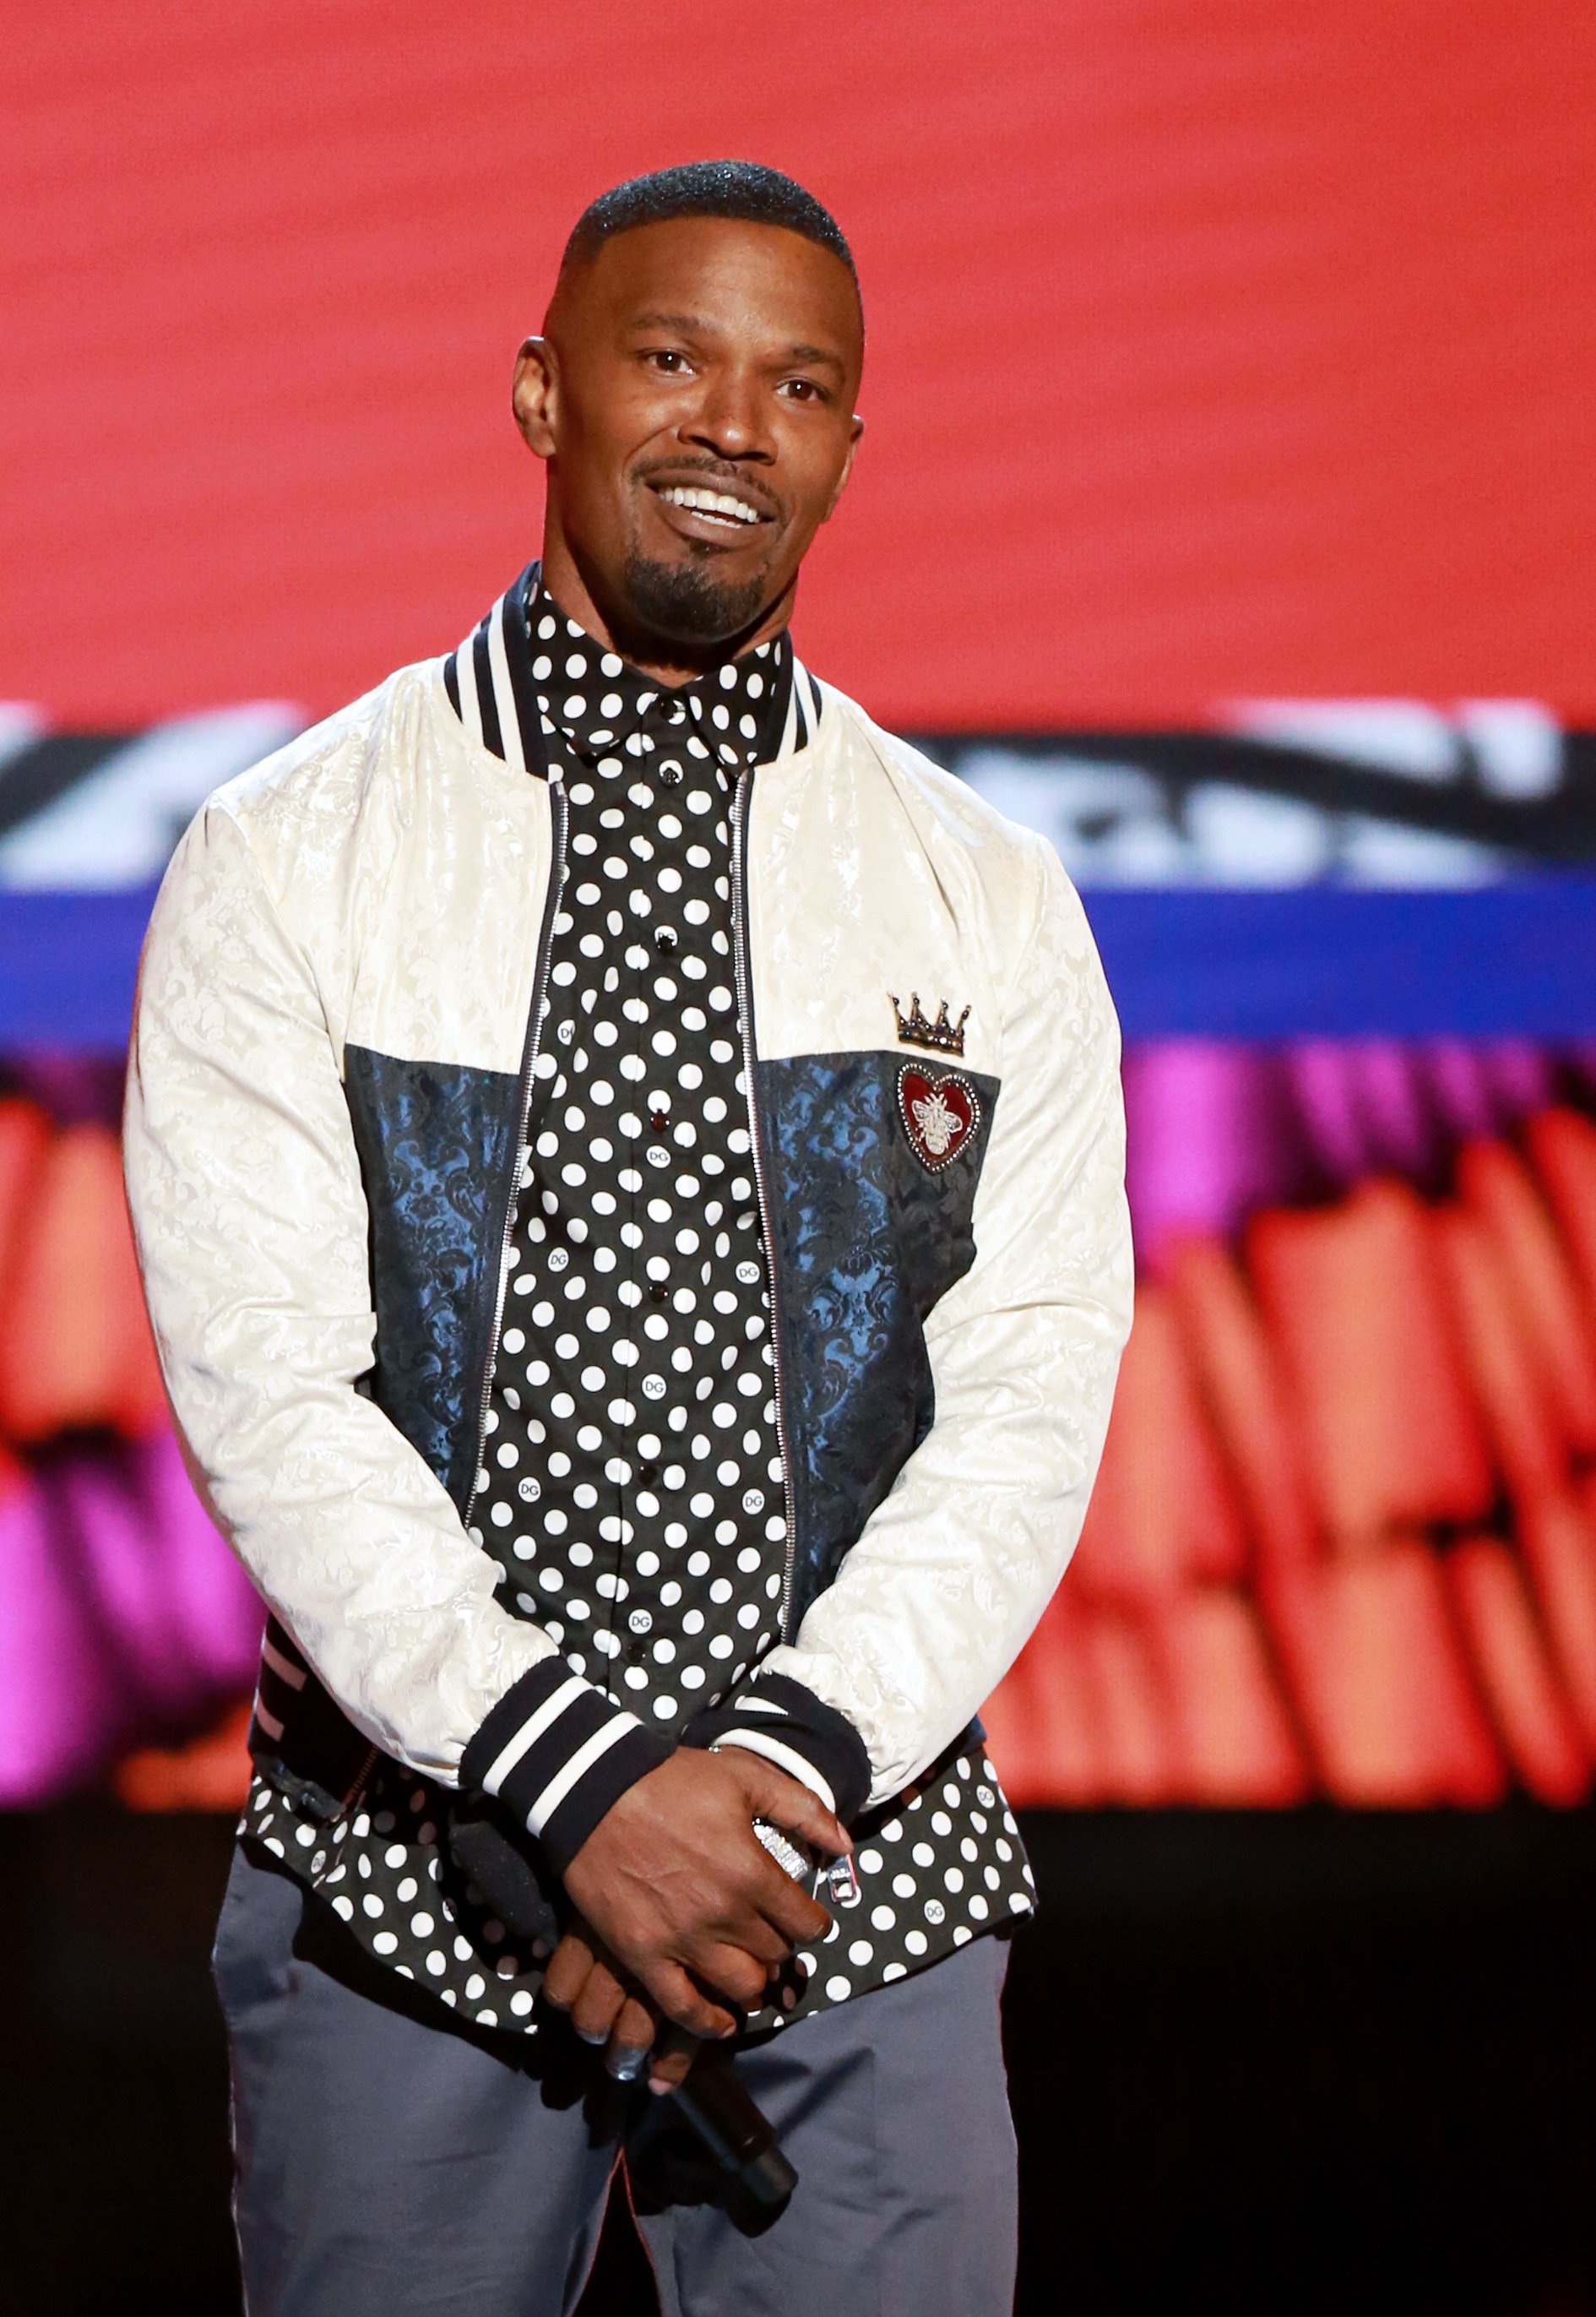 Jamie Foxx hosts the BET Awards in Los Angeles, California on June 24, 2018 | Photo: Getty Images